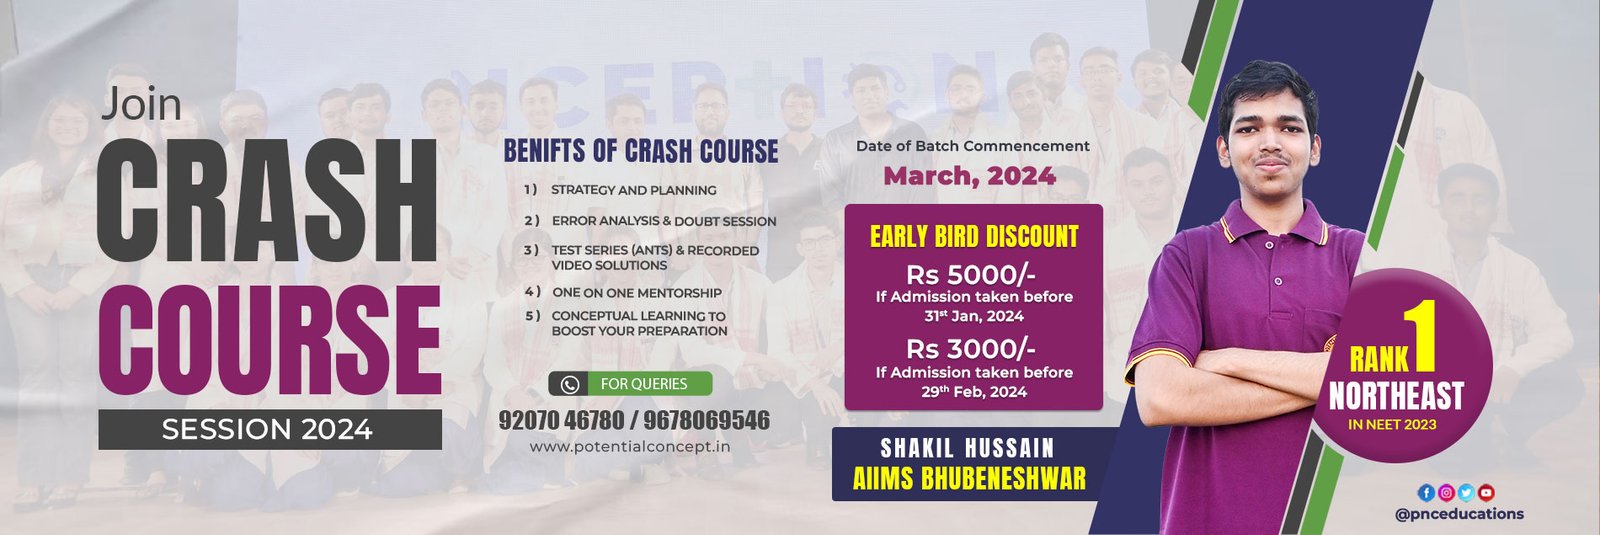 Ccrash course for JEE and NEET aspirants in 2024